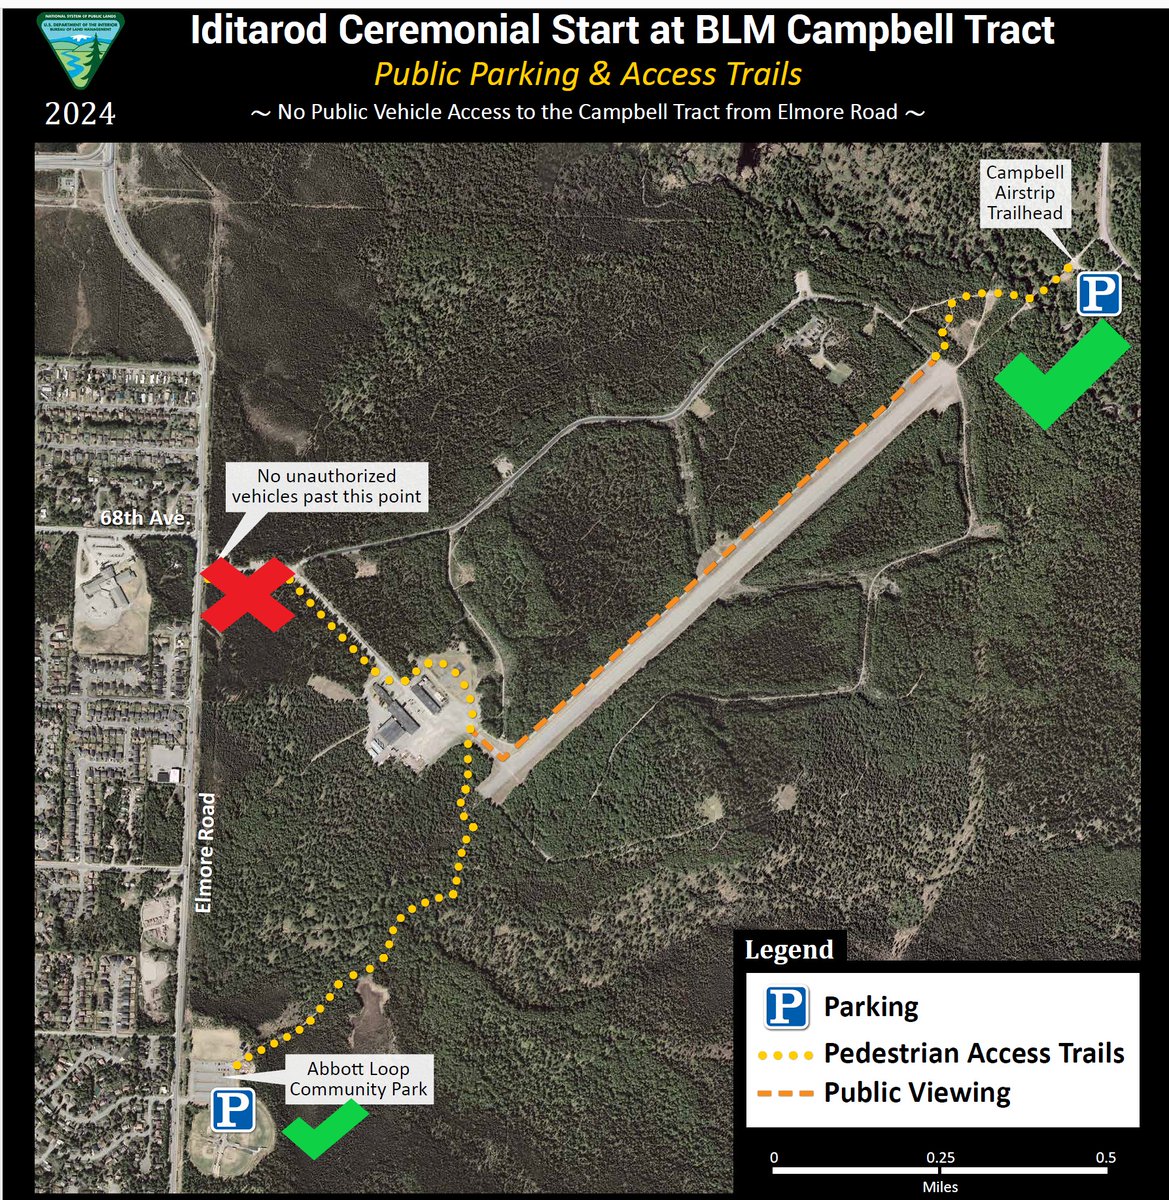 ❌❌There will be no public parking available at the Campbell Tract on Saturday March 2. ❌❌ Parking at the Smokejumper Trailhead will be closed for the event, starting Friday, March 1 at 4PM. The ceremonial start begins downtown at 10am. #Iditarod #Iditarod2024 #AlaskaLife